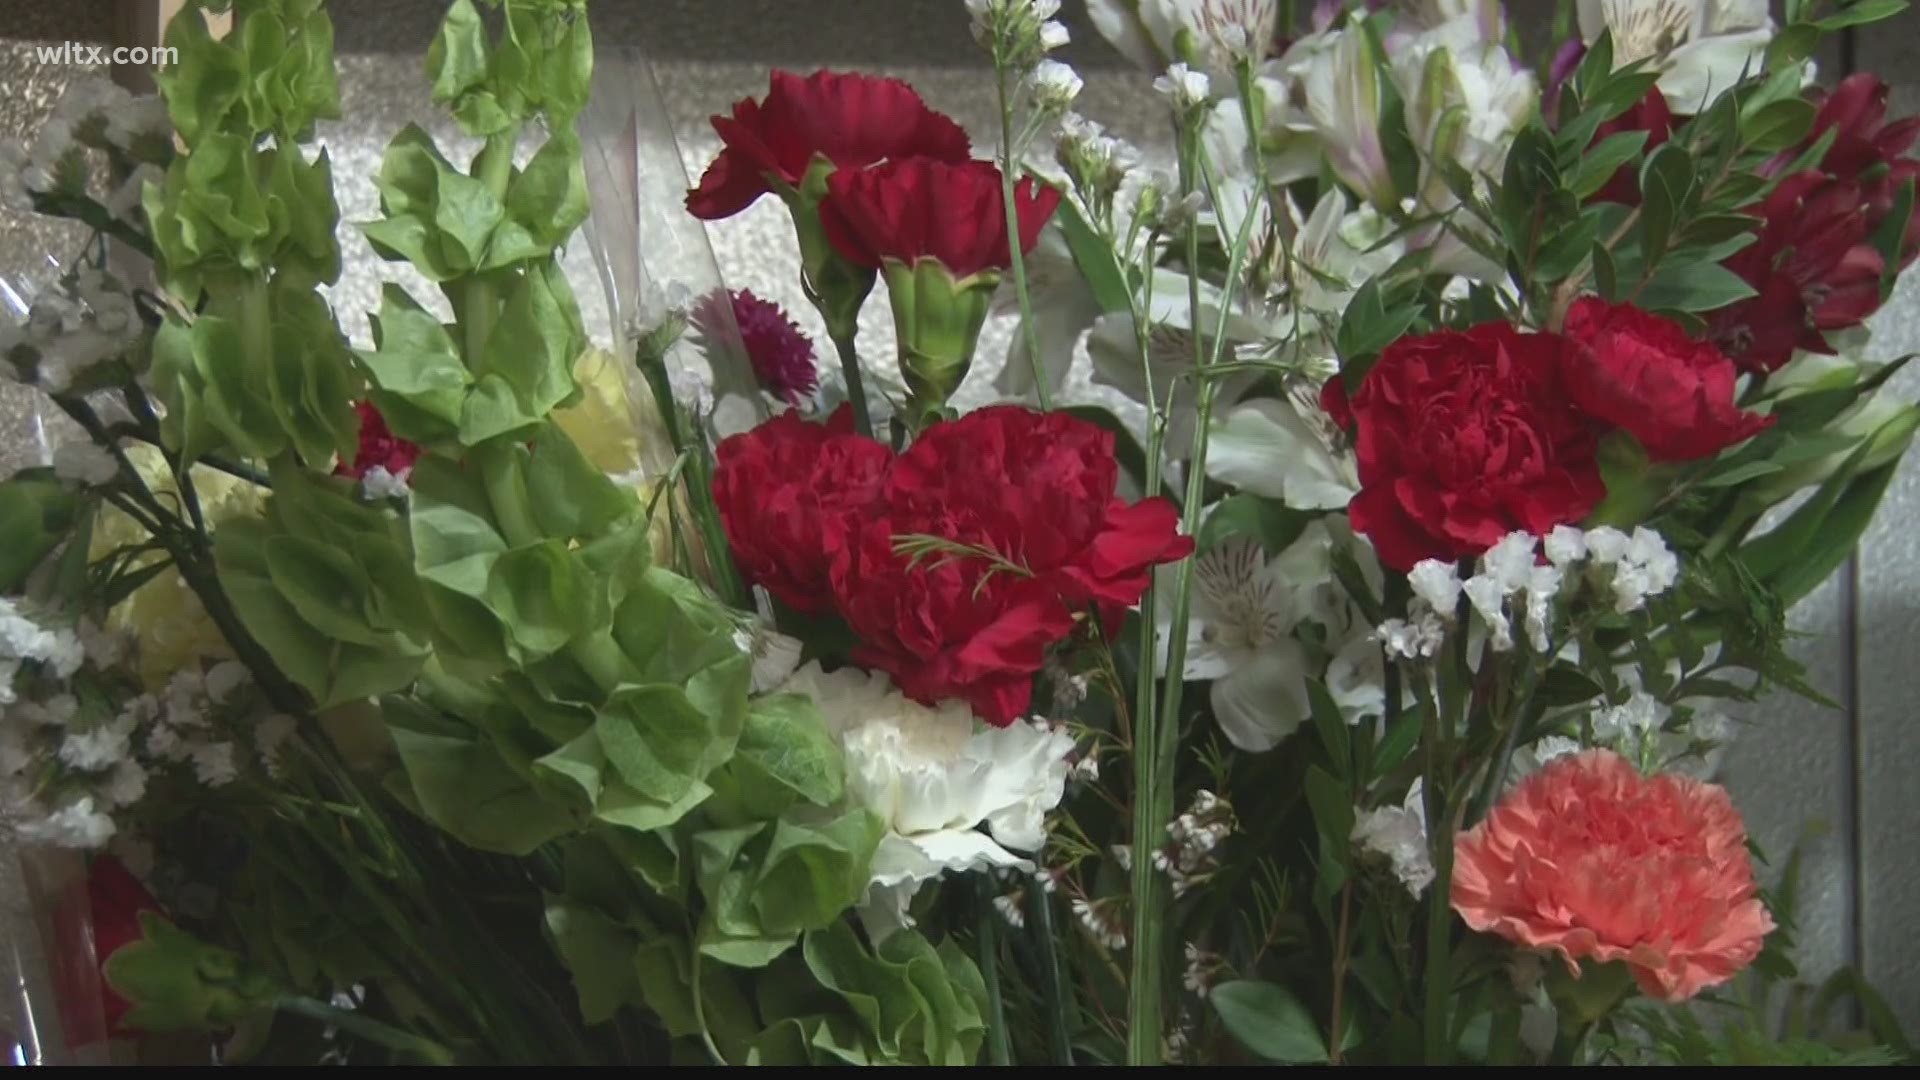 According to local florists, flowers are harder to get, but some are finding creative ways to make customers happy.